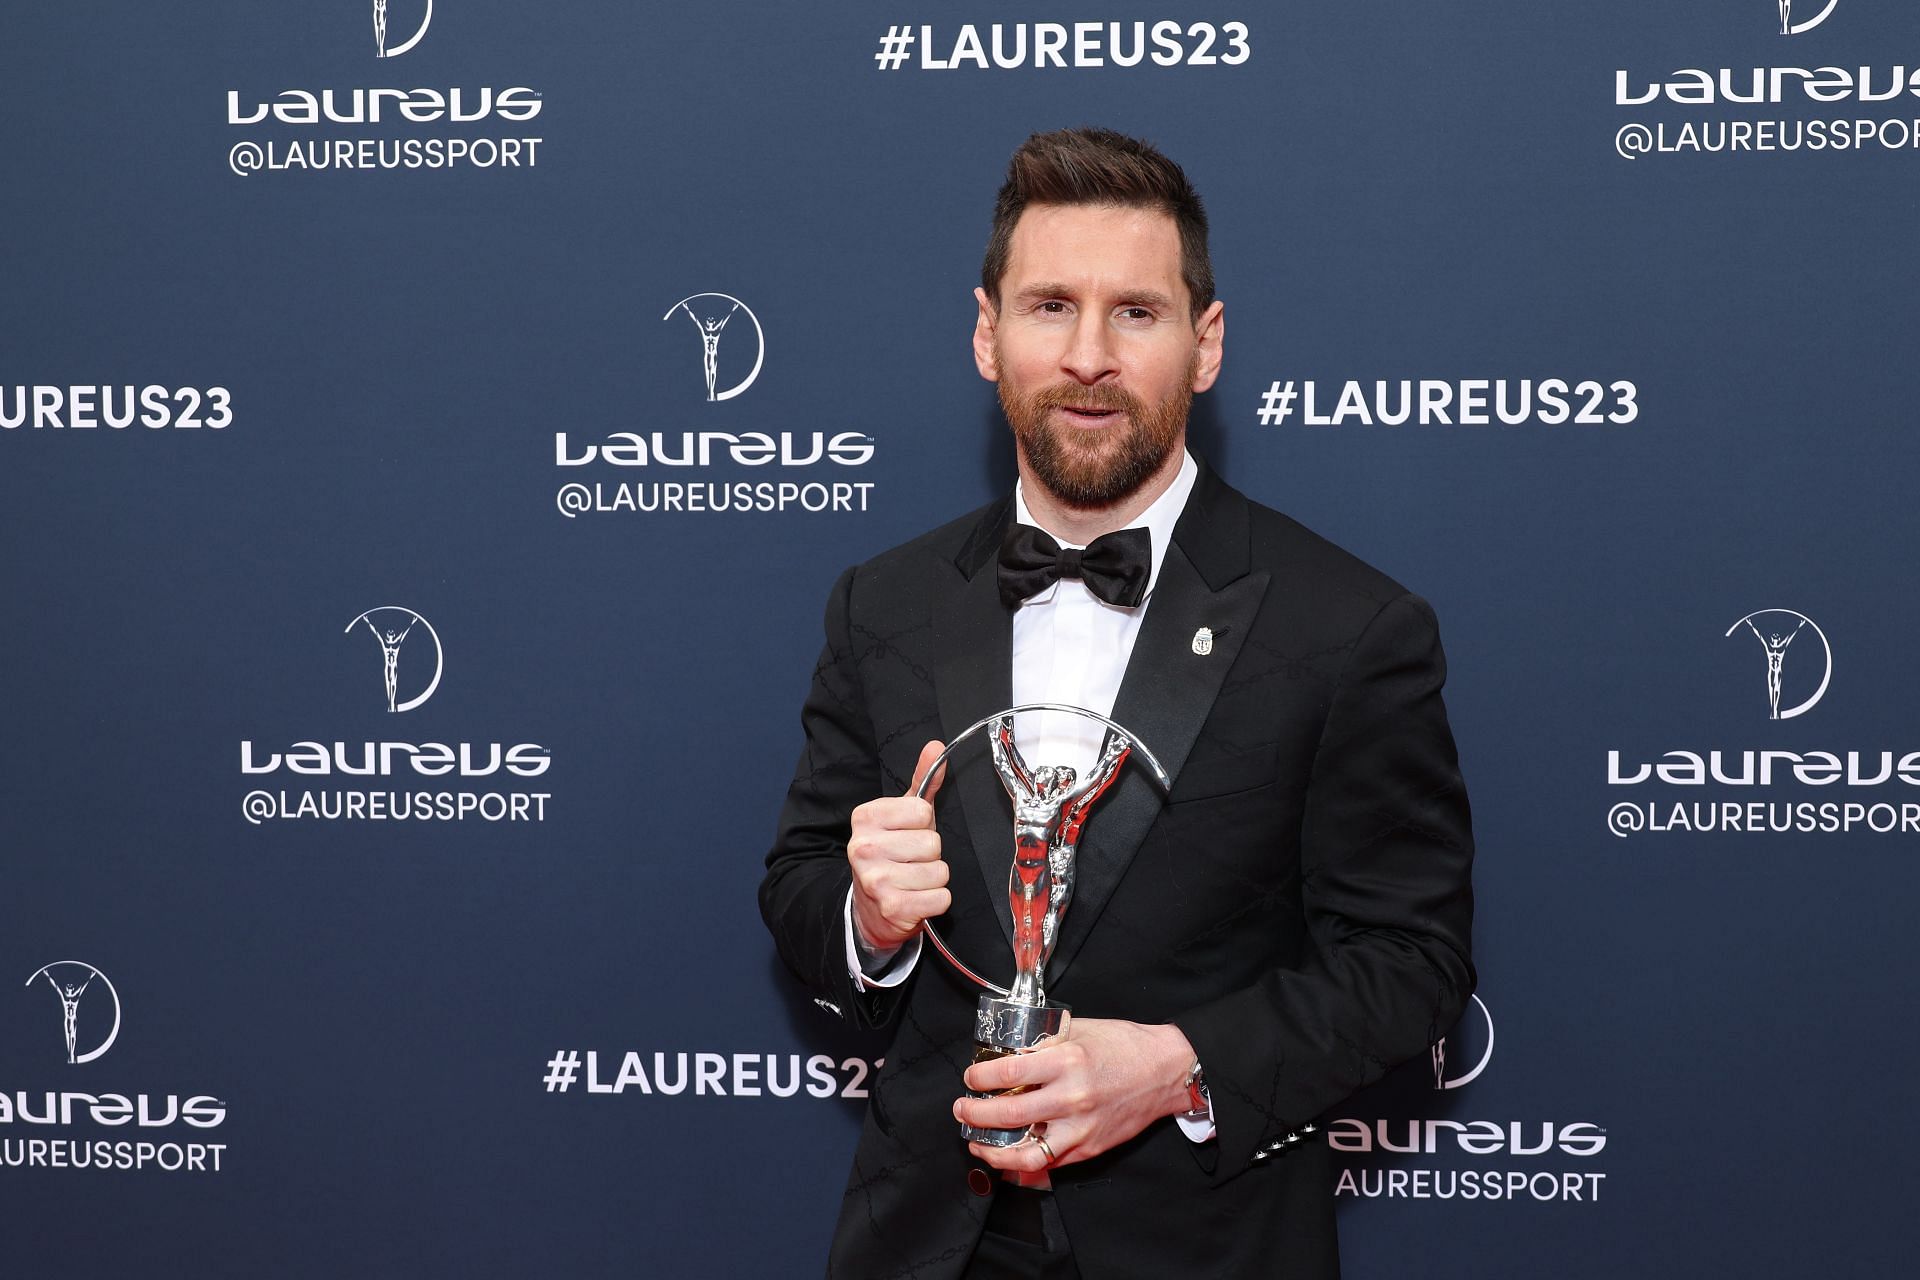 Messi may look more confident in front of the camera now, but that was not always the case.